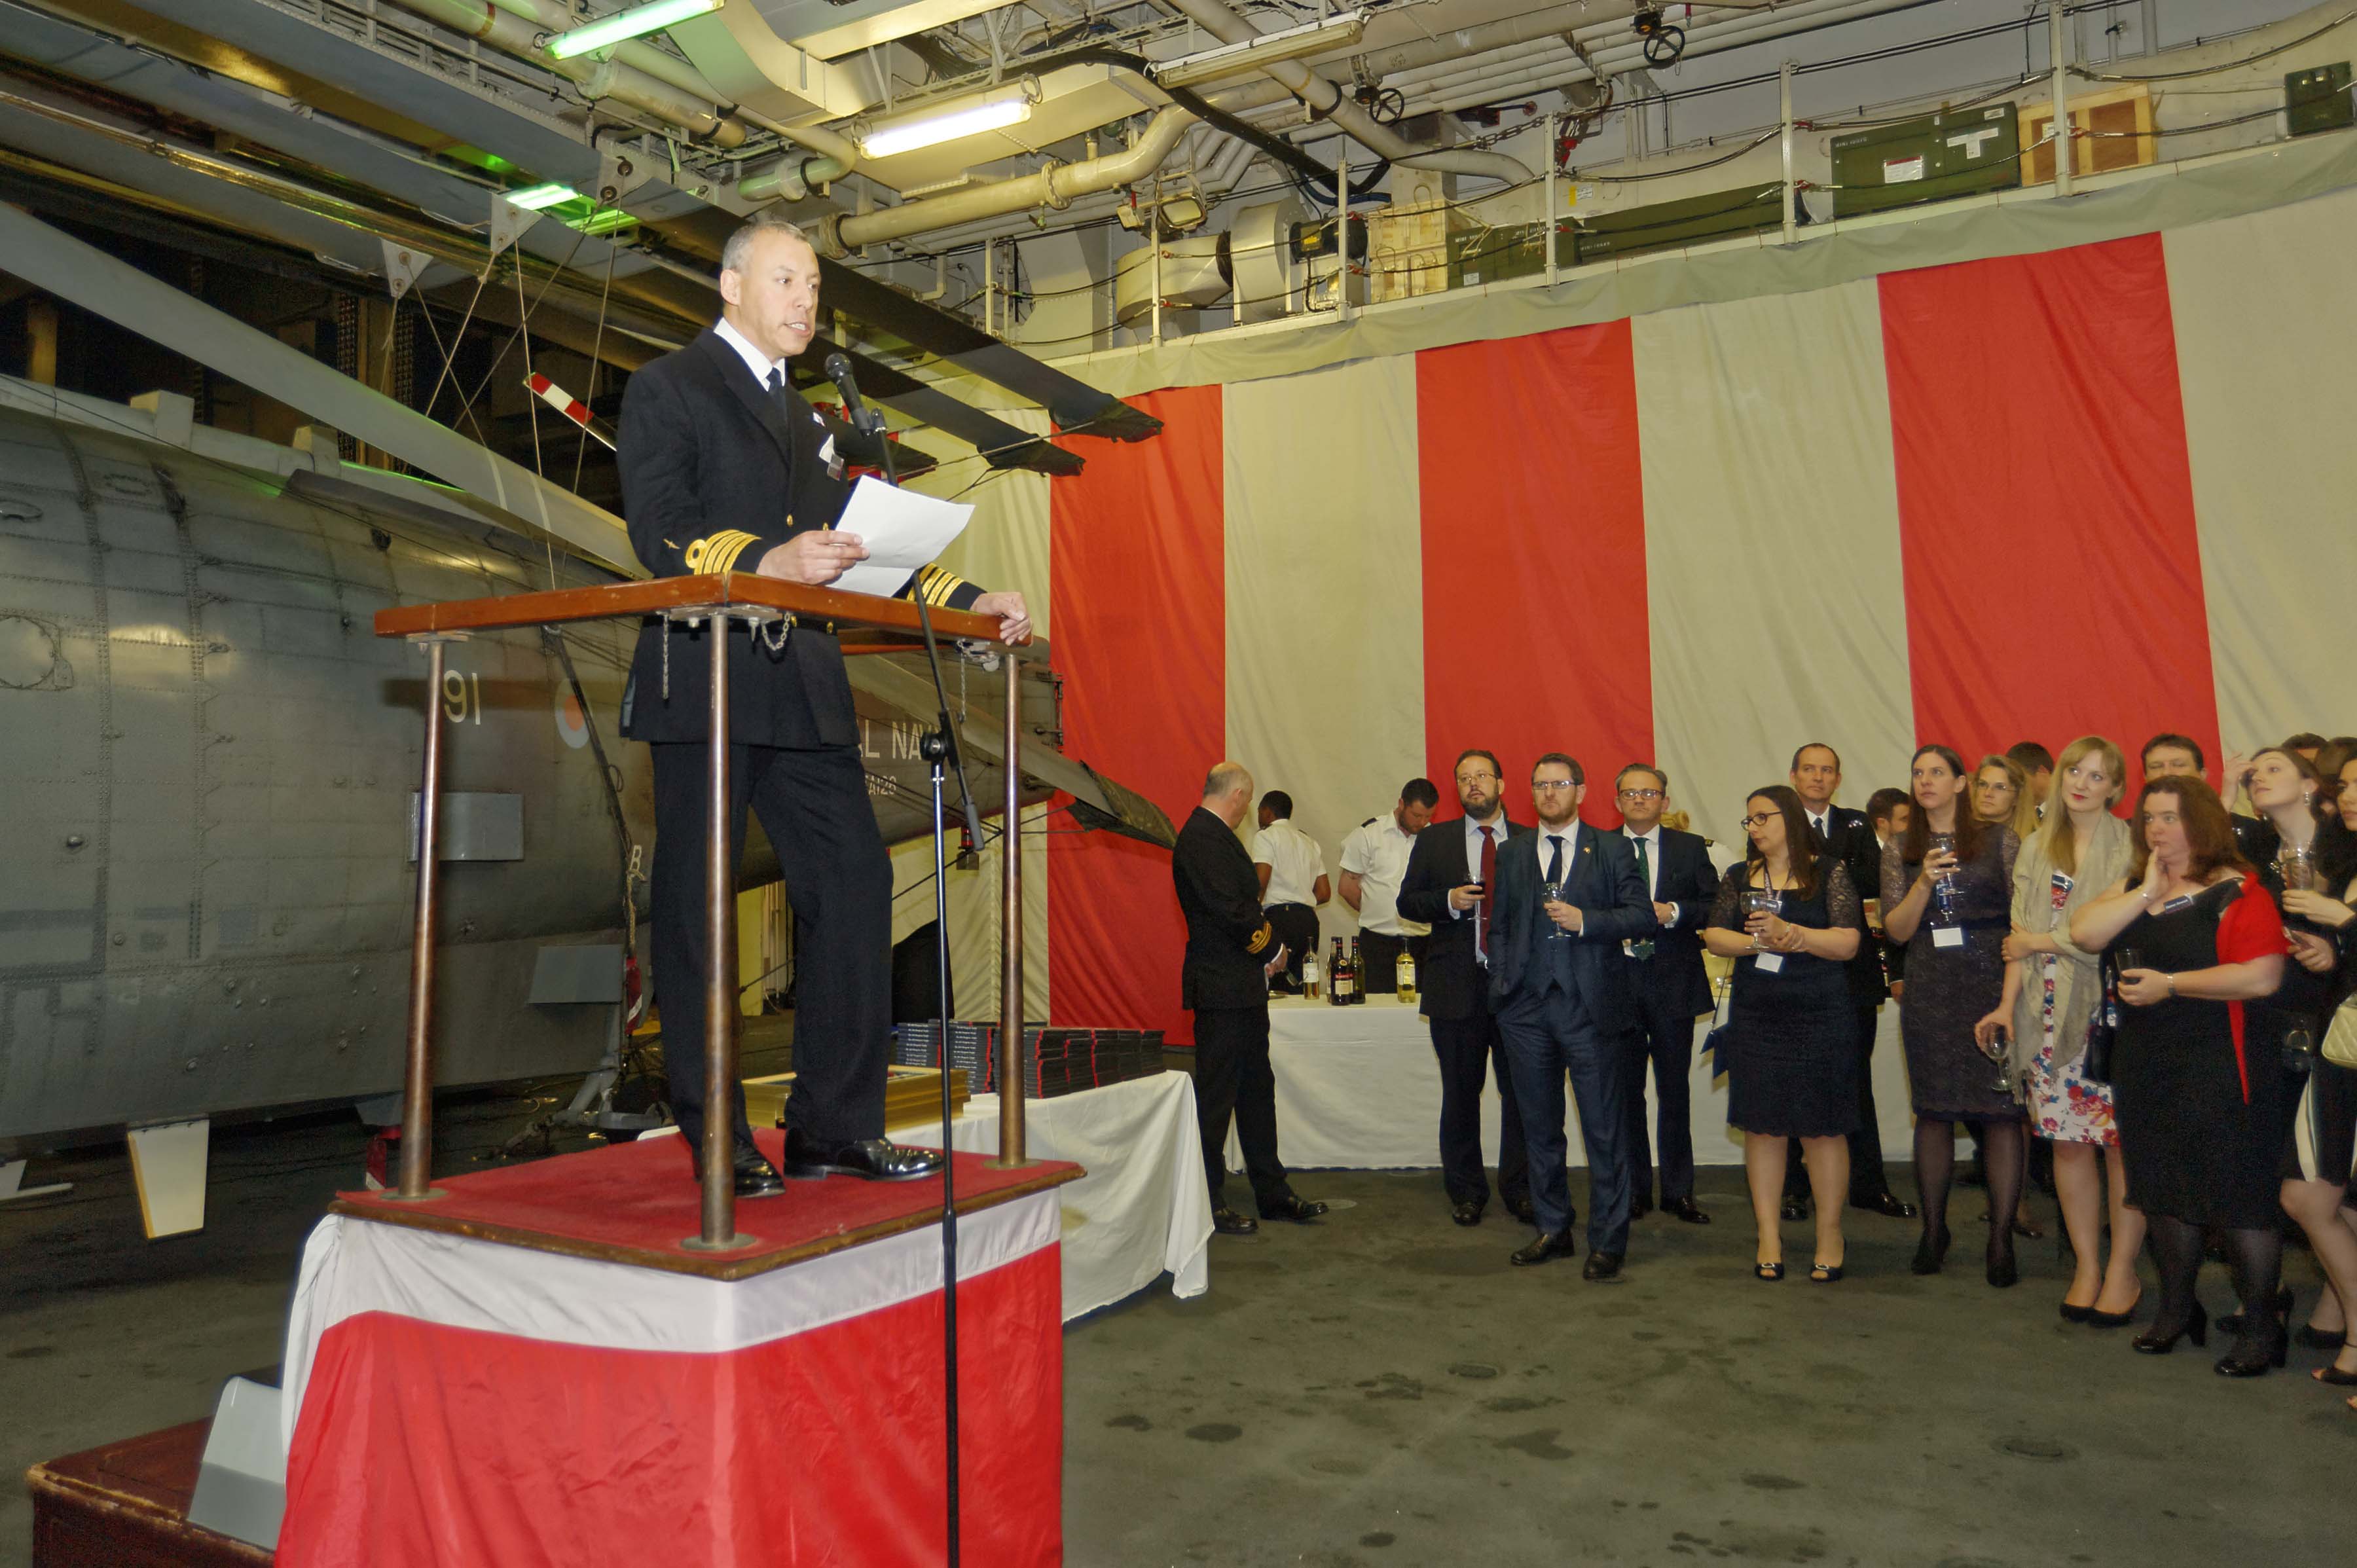 The Captain of HMS Ocean addressing the guests at the Peregrine Trophy Awards Ceremony